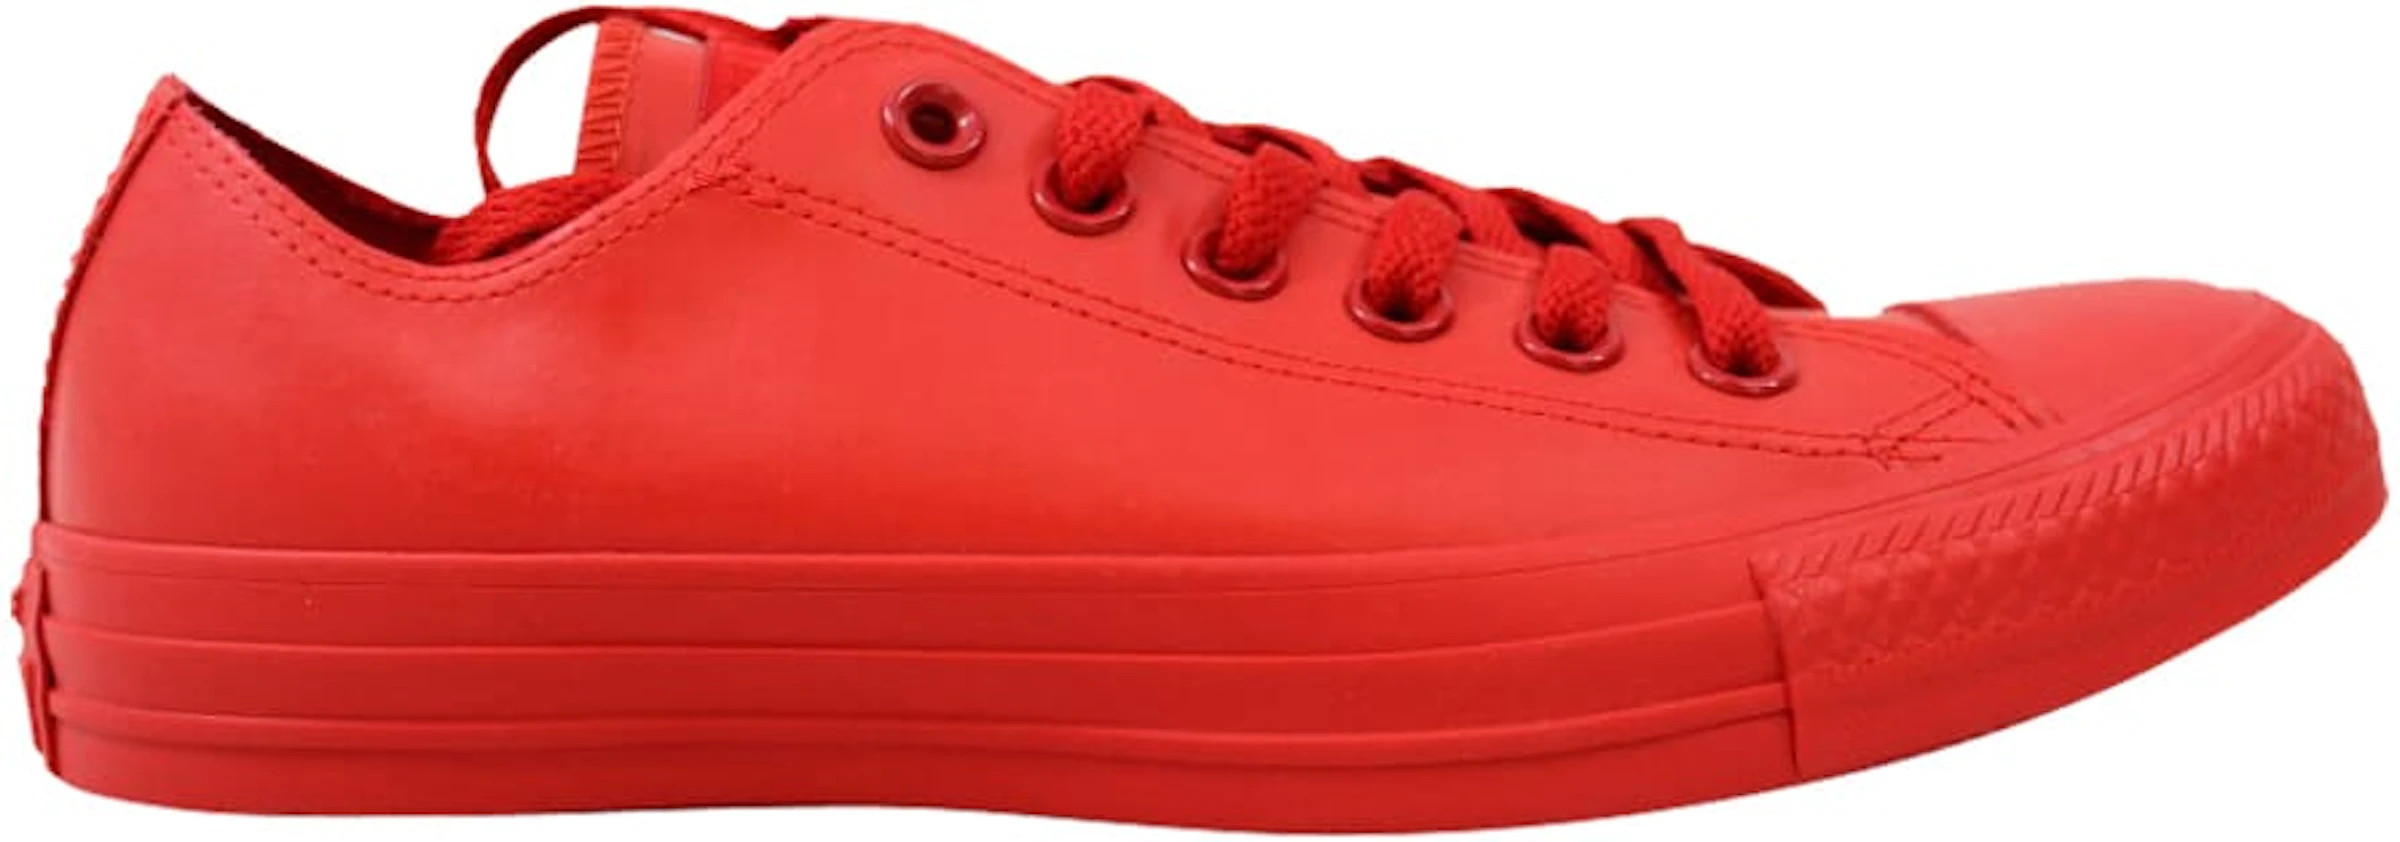 Converse Chuck Taylor All-Star Red - 151164C US